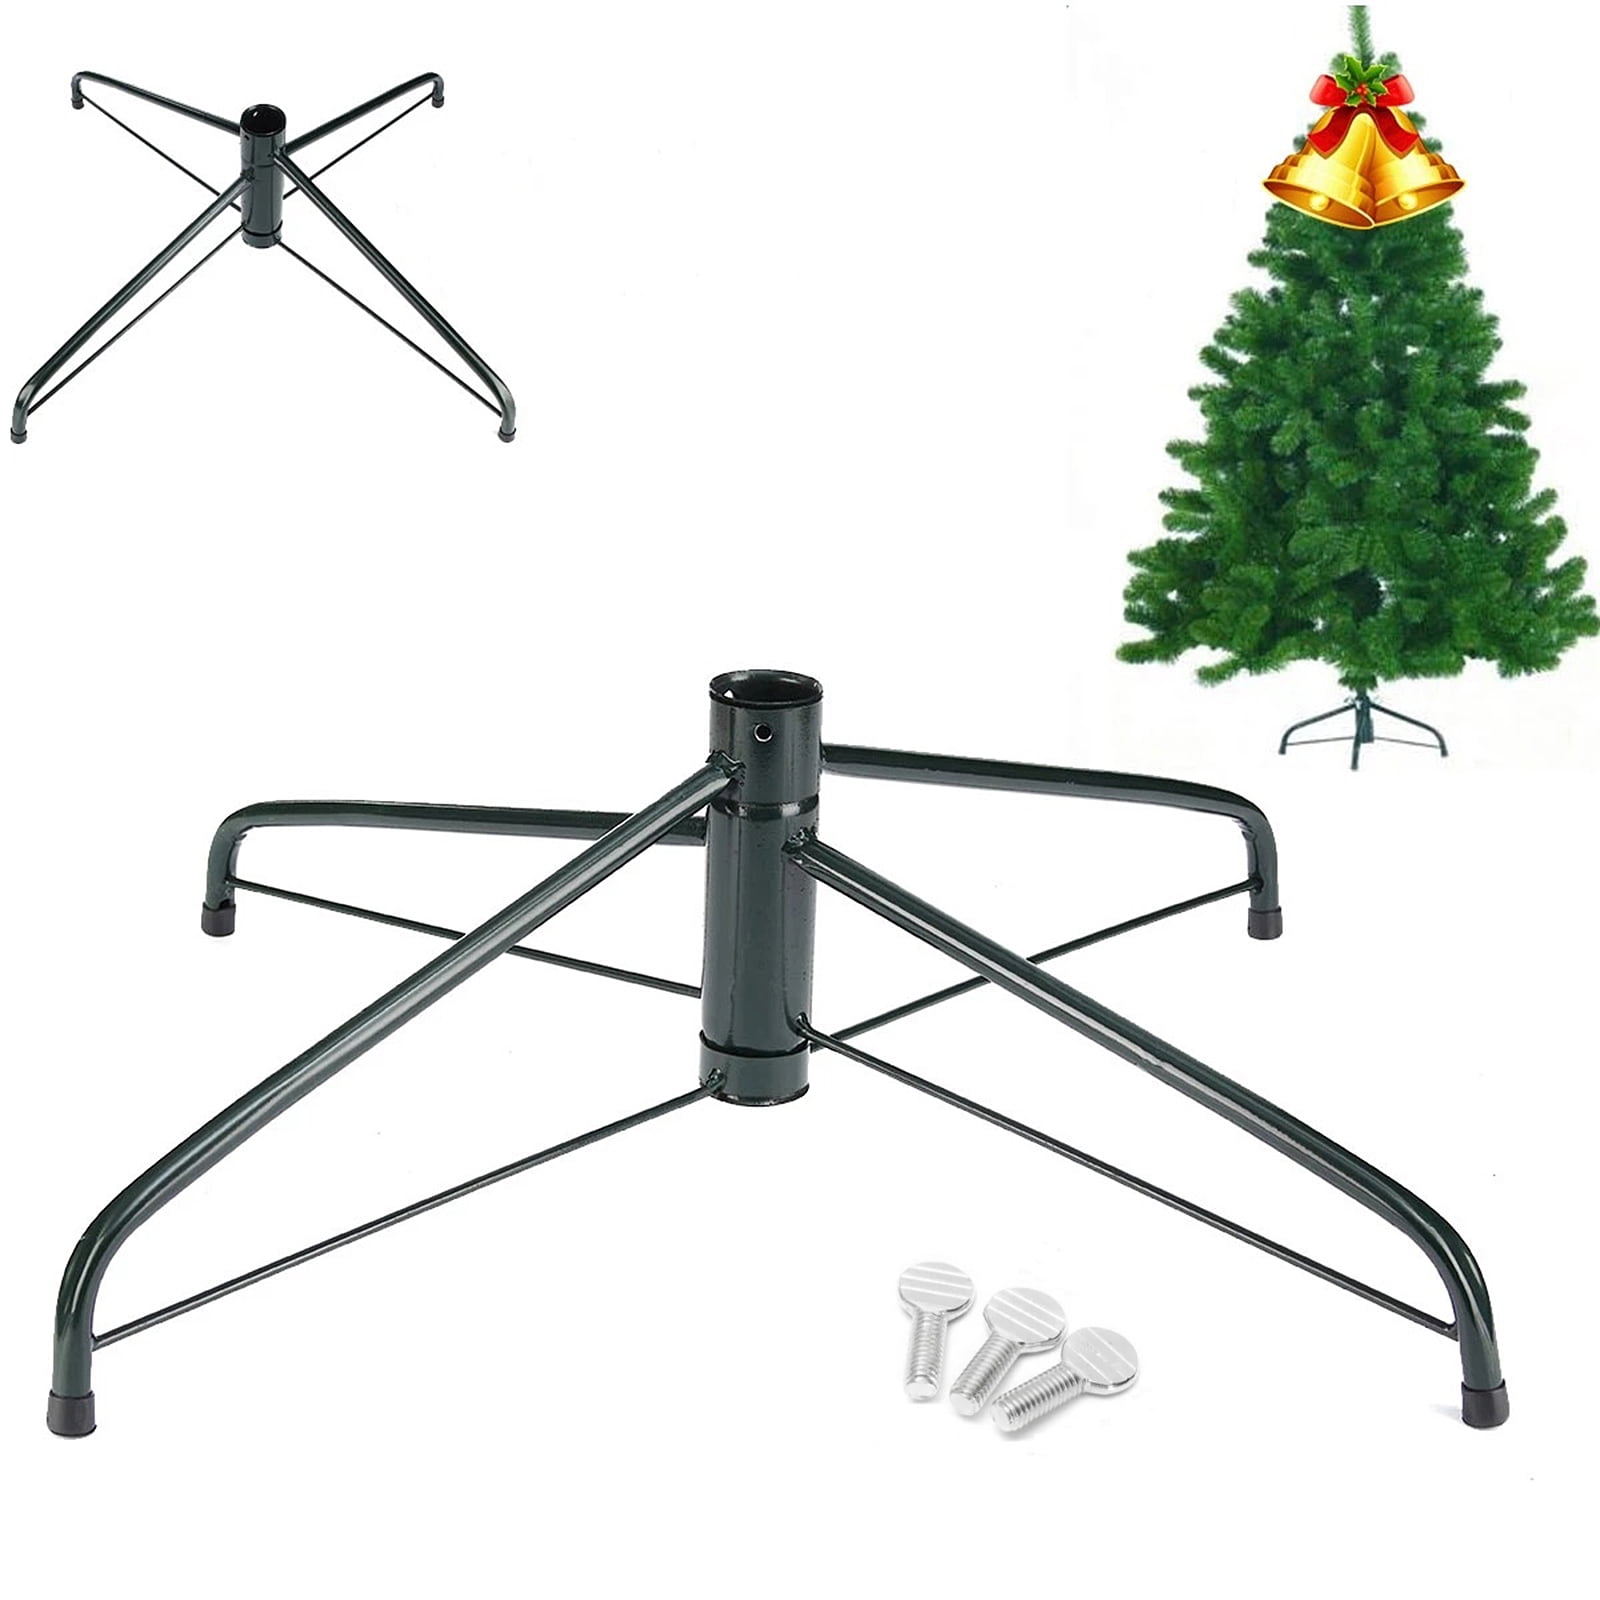 3-Pack Moultrie Ez Tree Mount Gift Xmas US SELLER New 